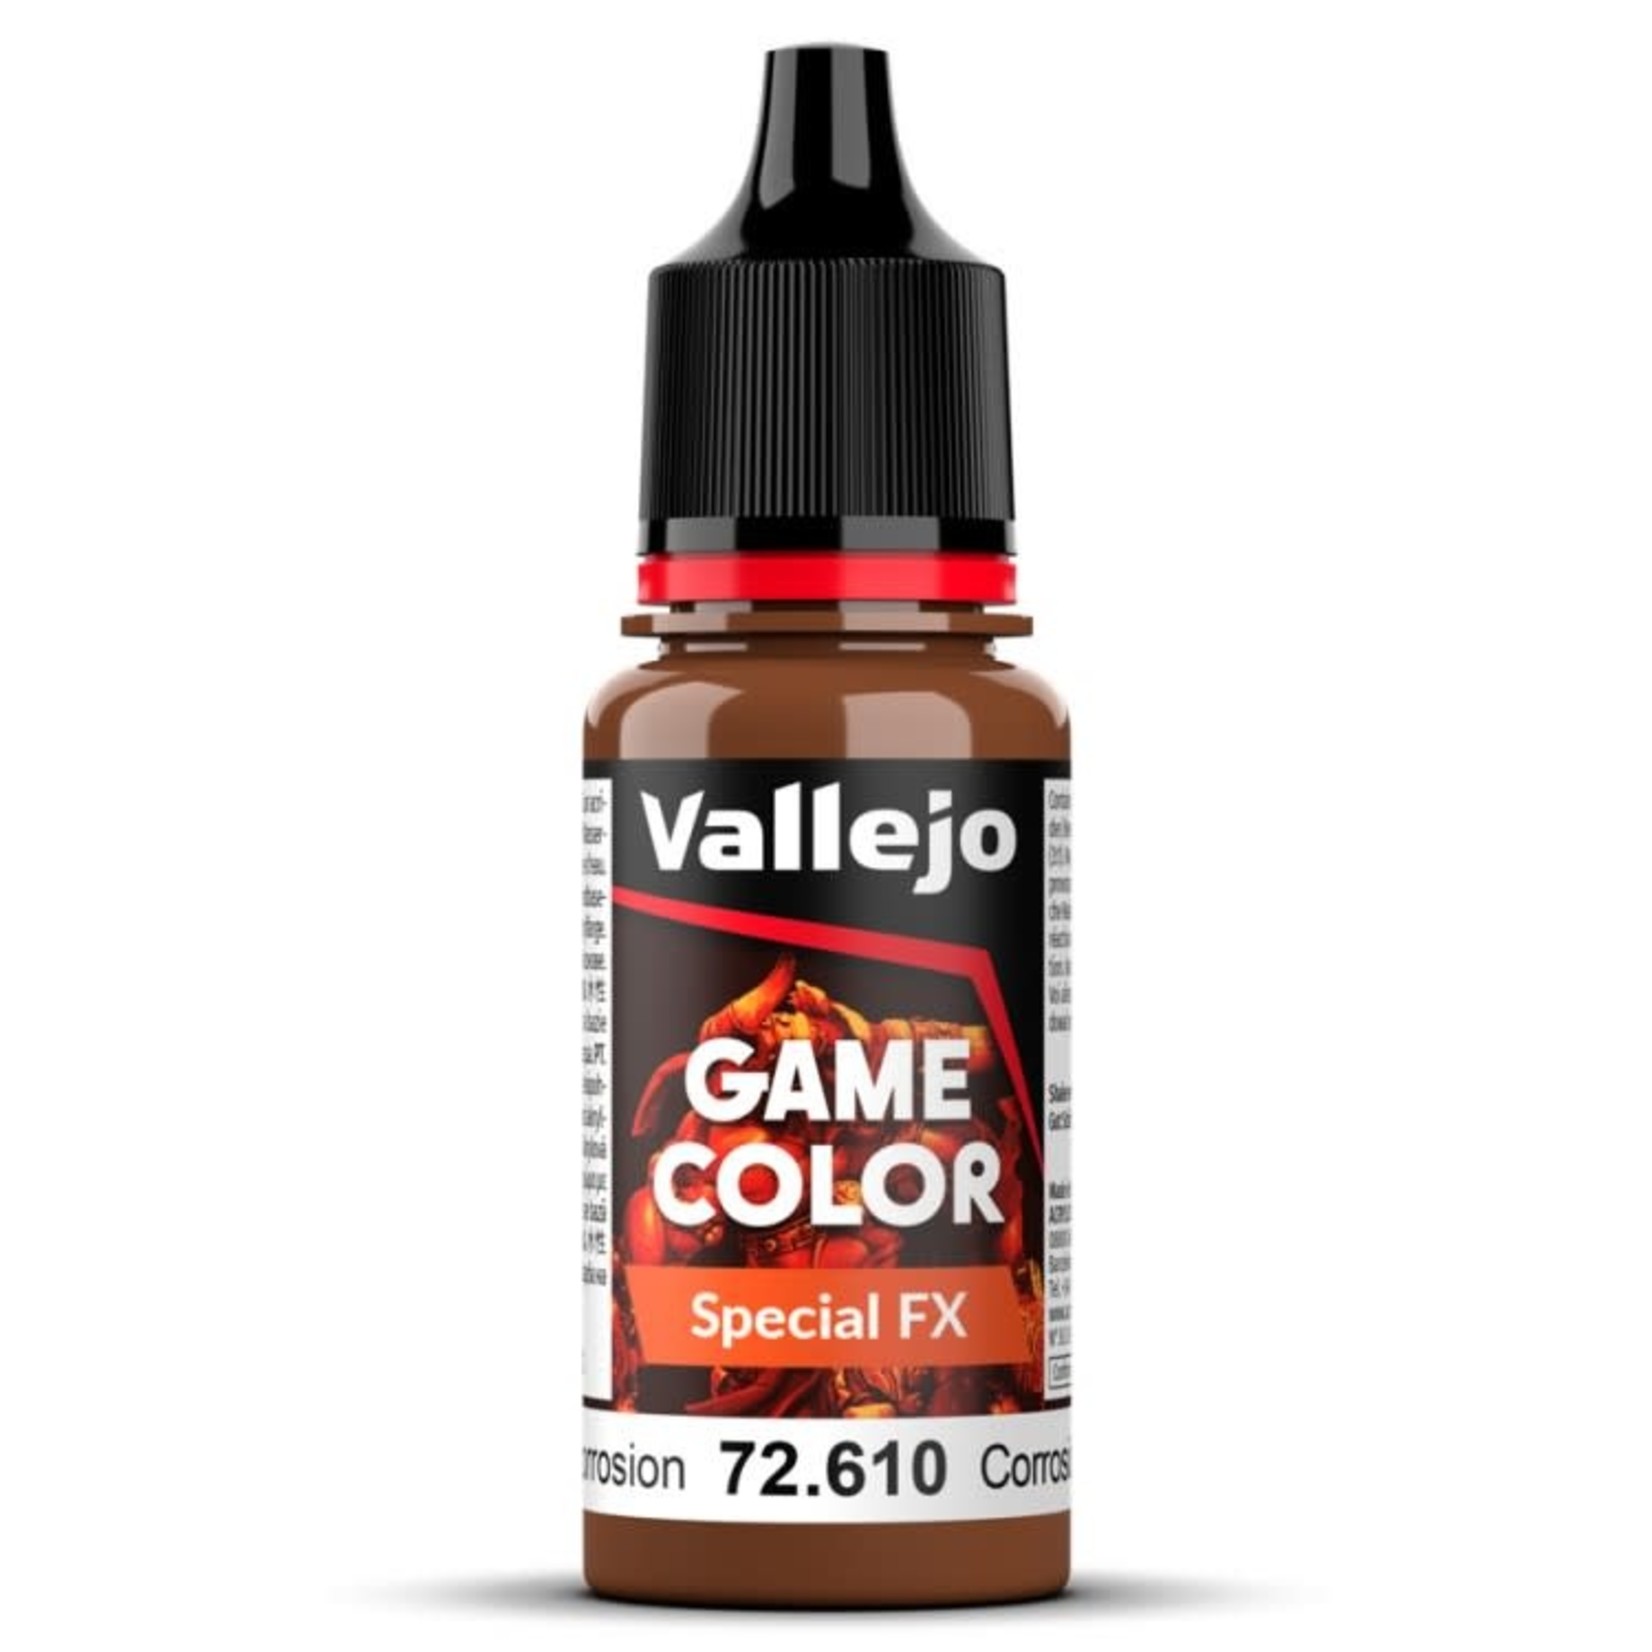 Vallejo Paint: Game Color, Special FX (Galvanic Corrosion)